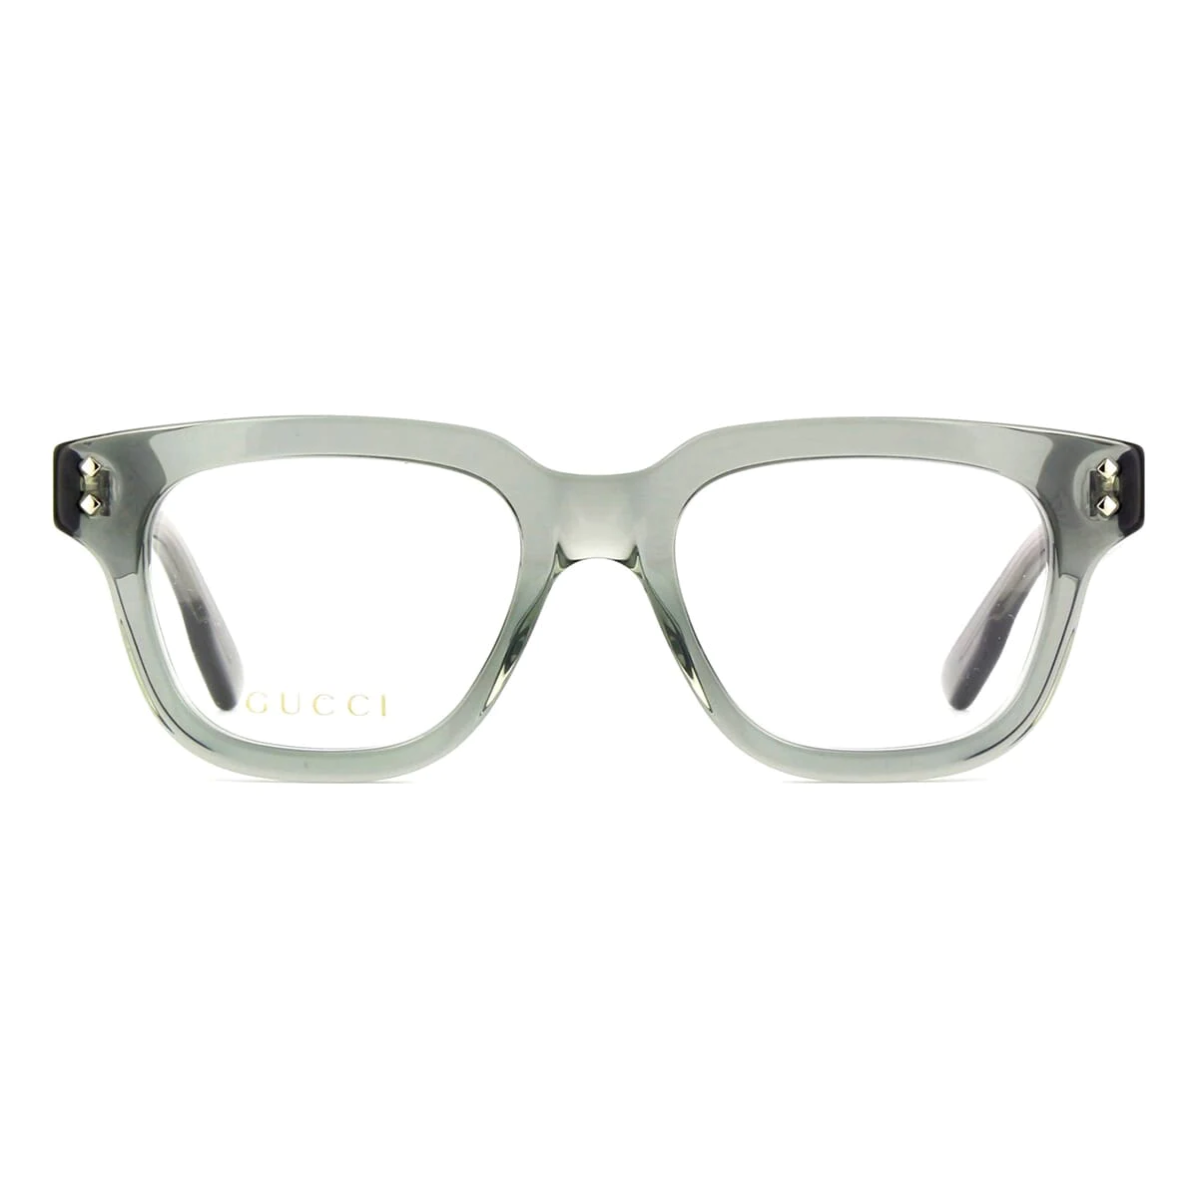 "Gucci 1219O Frame - Stylish and luxurious eyewear for men and women at Optorium."